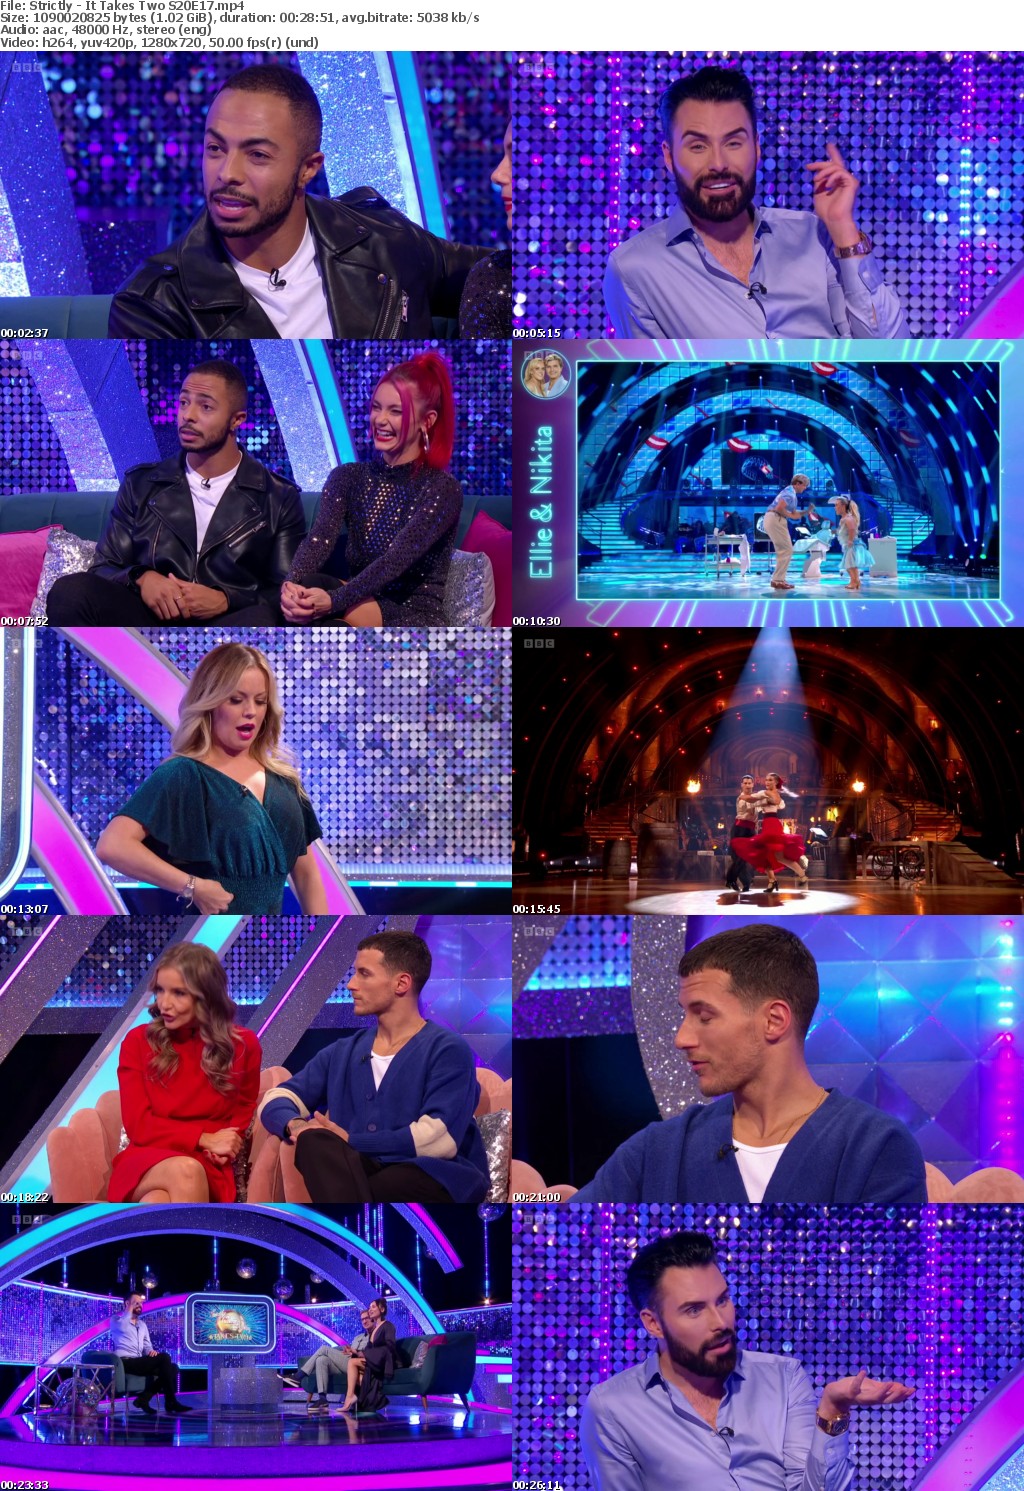 Strictly - It Takes Two S20E17 (1280x720p HD, 50fps, soft Eng subs)